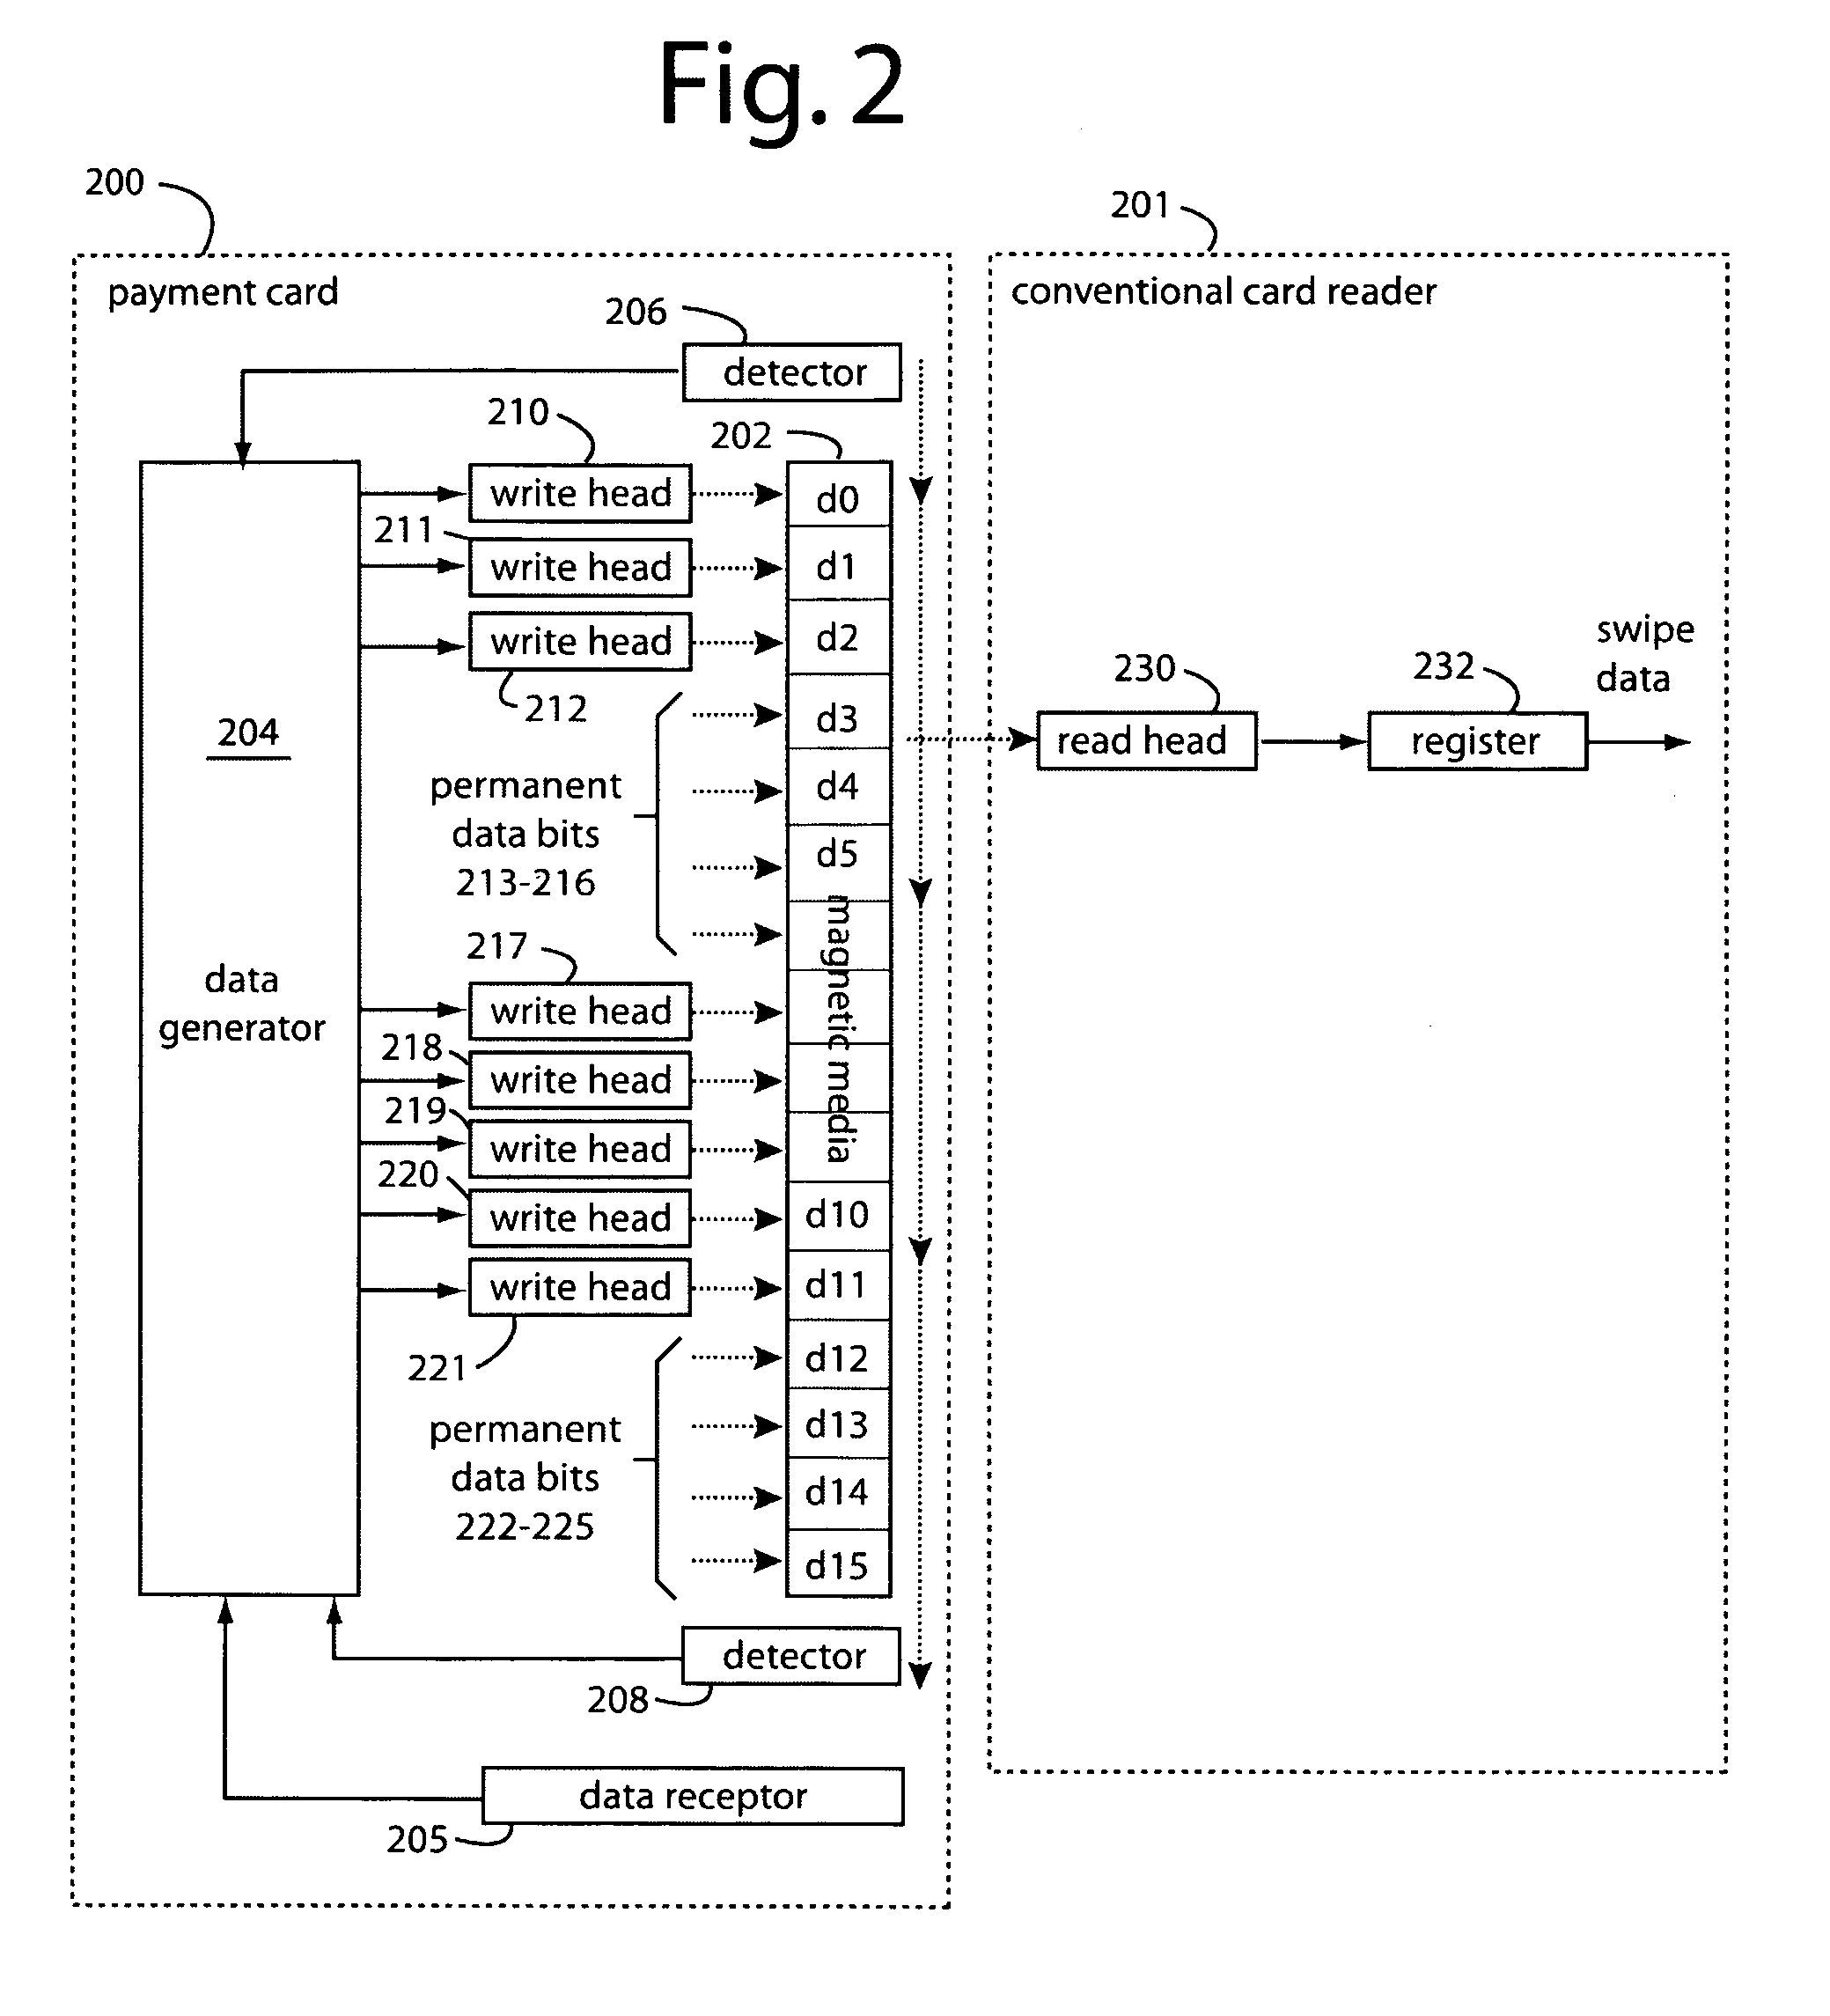 Payment card with internally generated virtual account numbers for its magnetic stripe encoder and user display